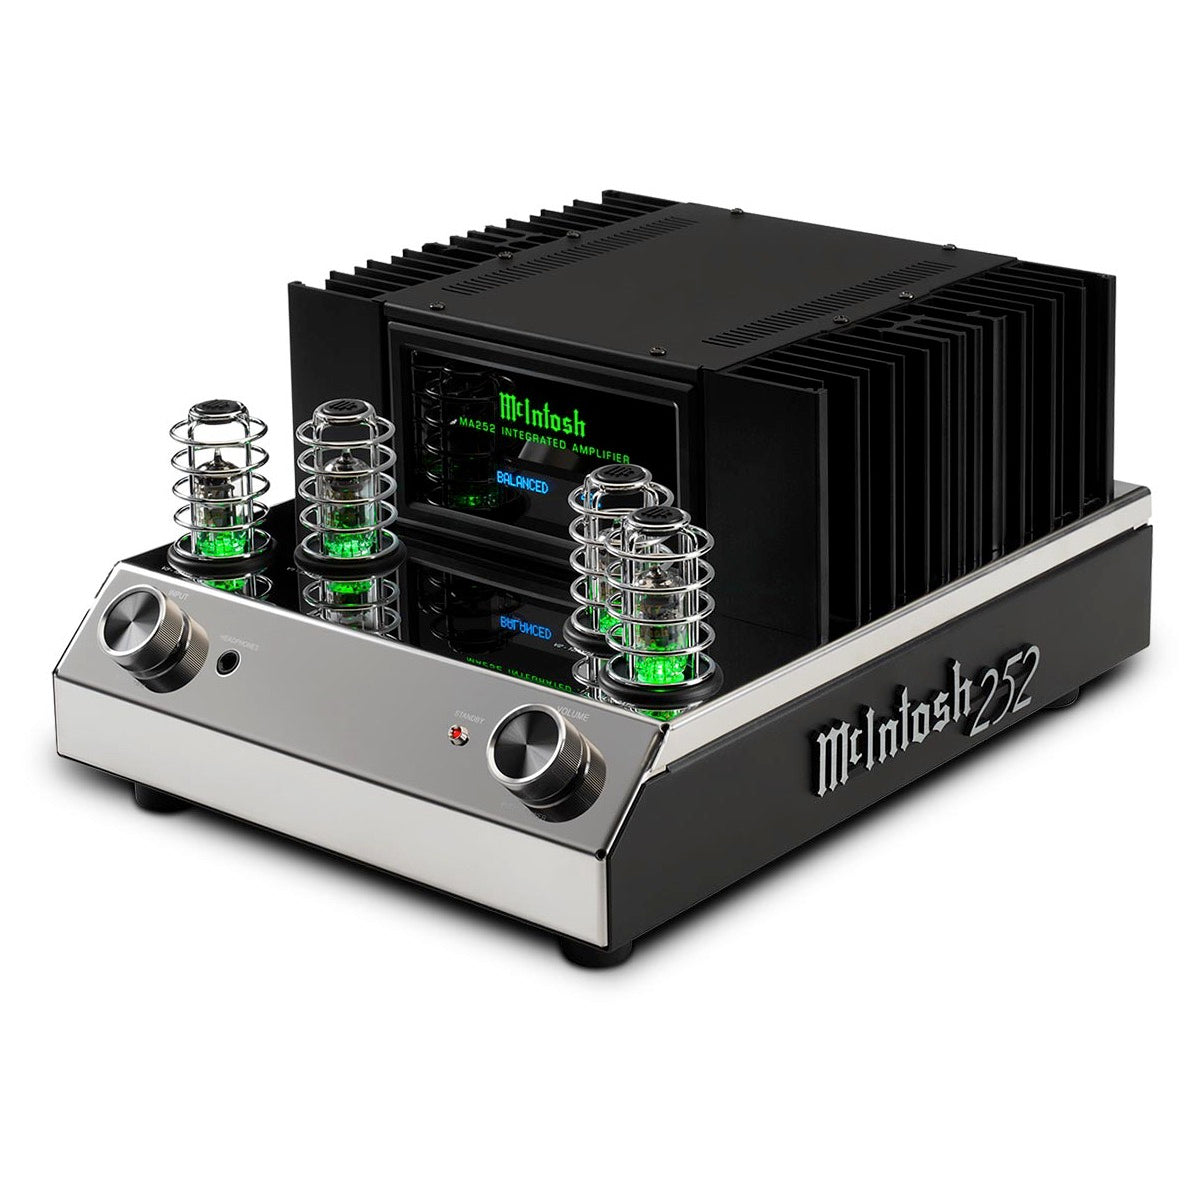 McIntosh Labs MA252 - 2 Channel Integrated Amplifier - AVStore